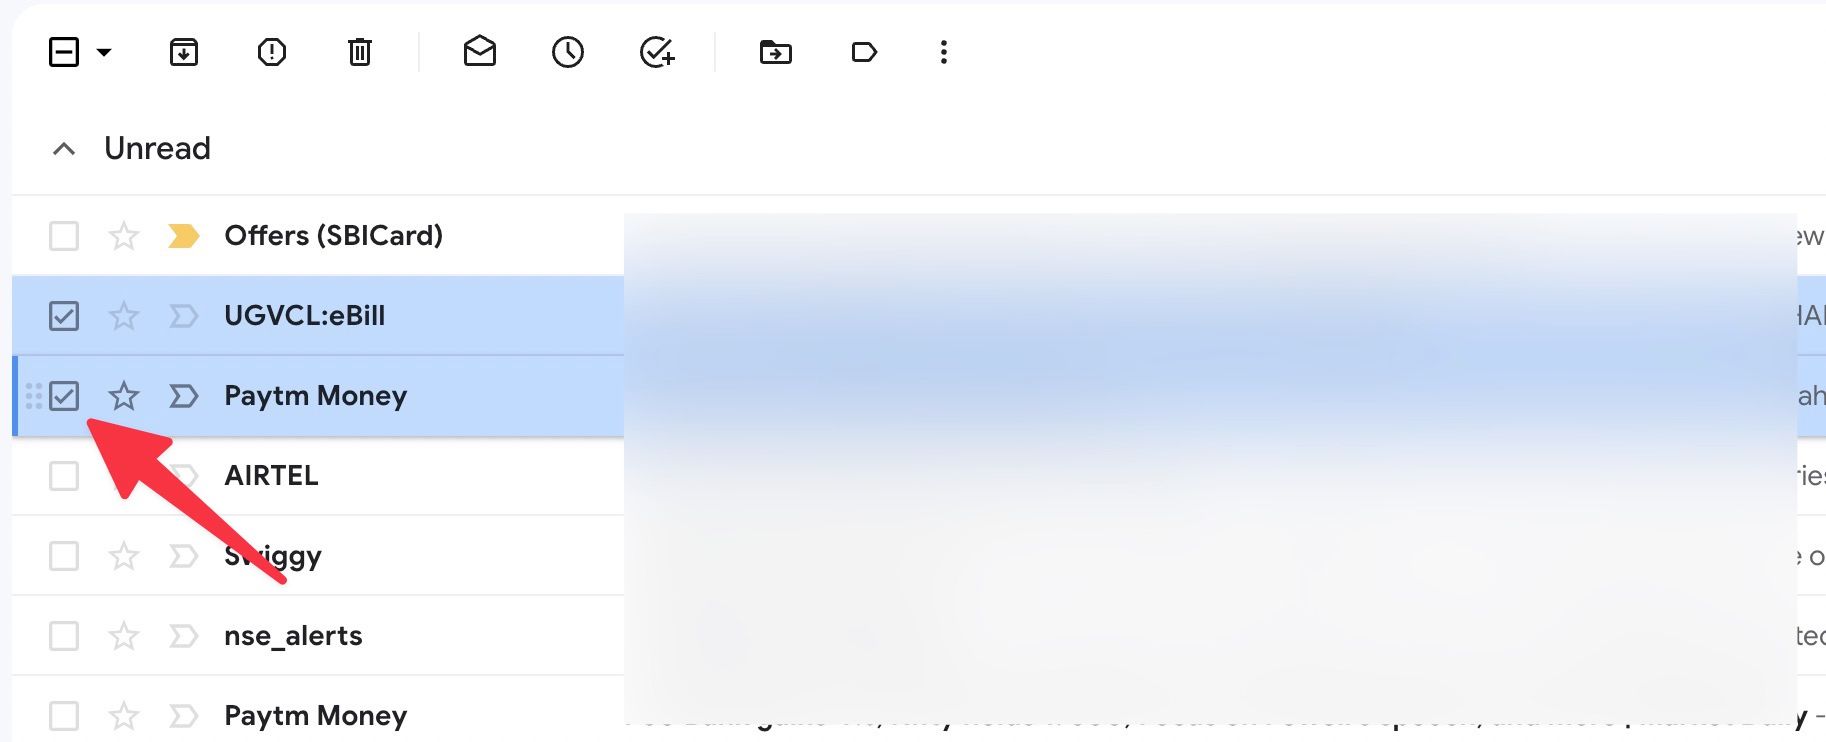 Select the Gmail messages you want to label